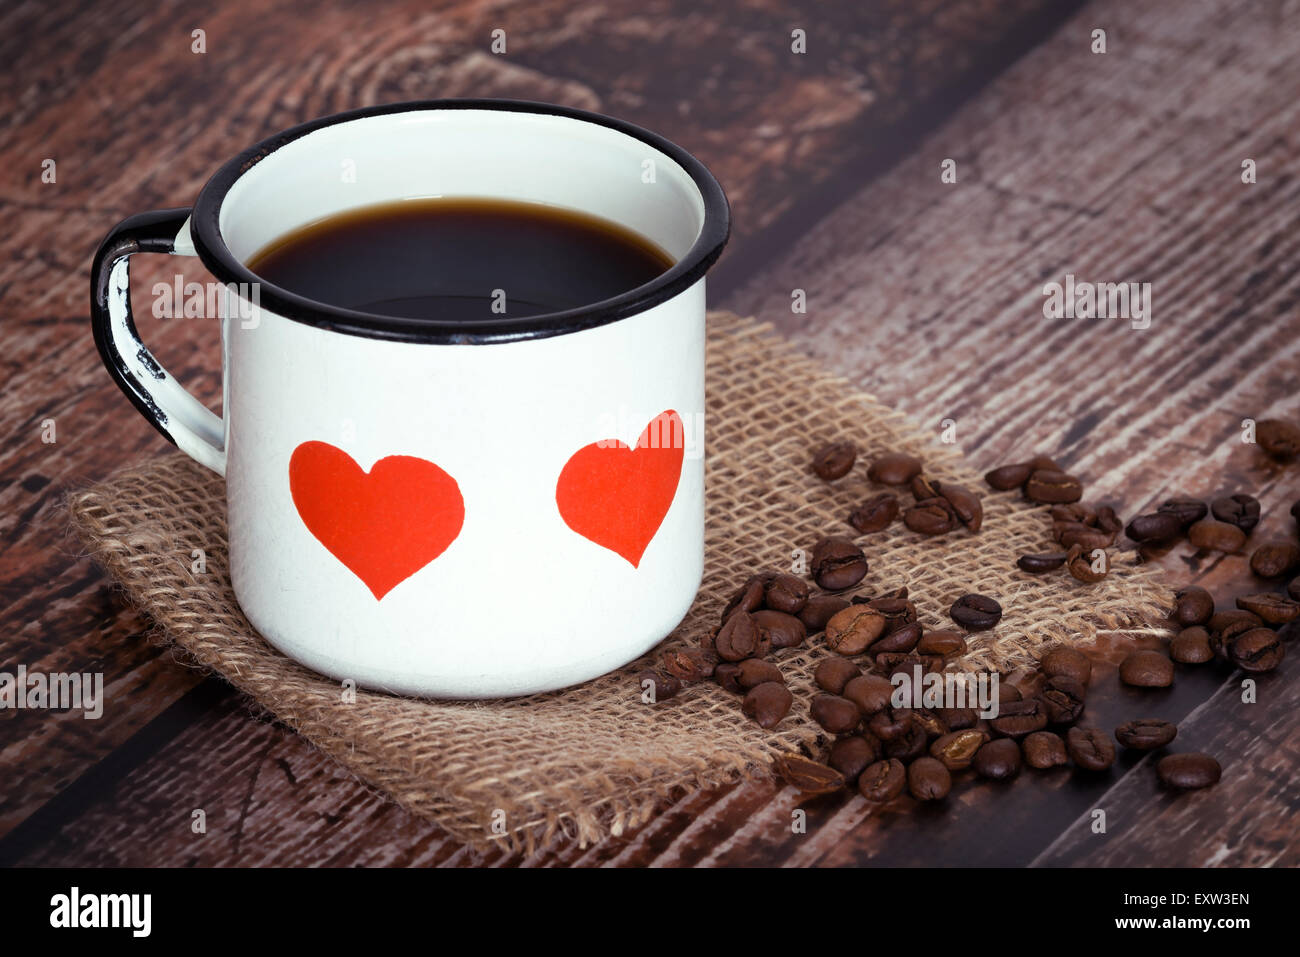 A cup of black coffee in an old enamel mug with hearts, coffee beans on vintage rustic background Stock Photo